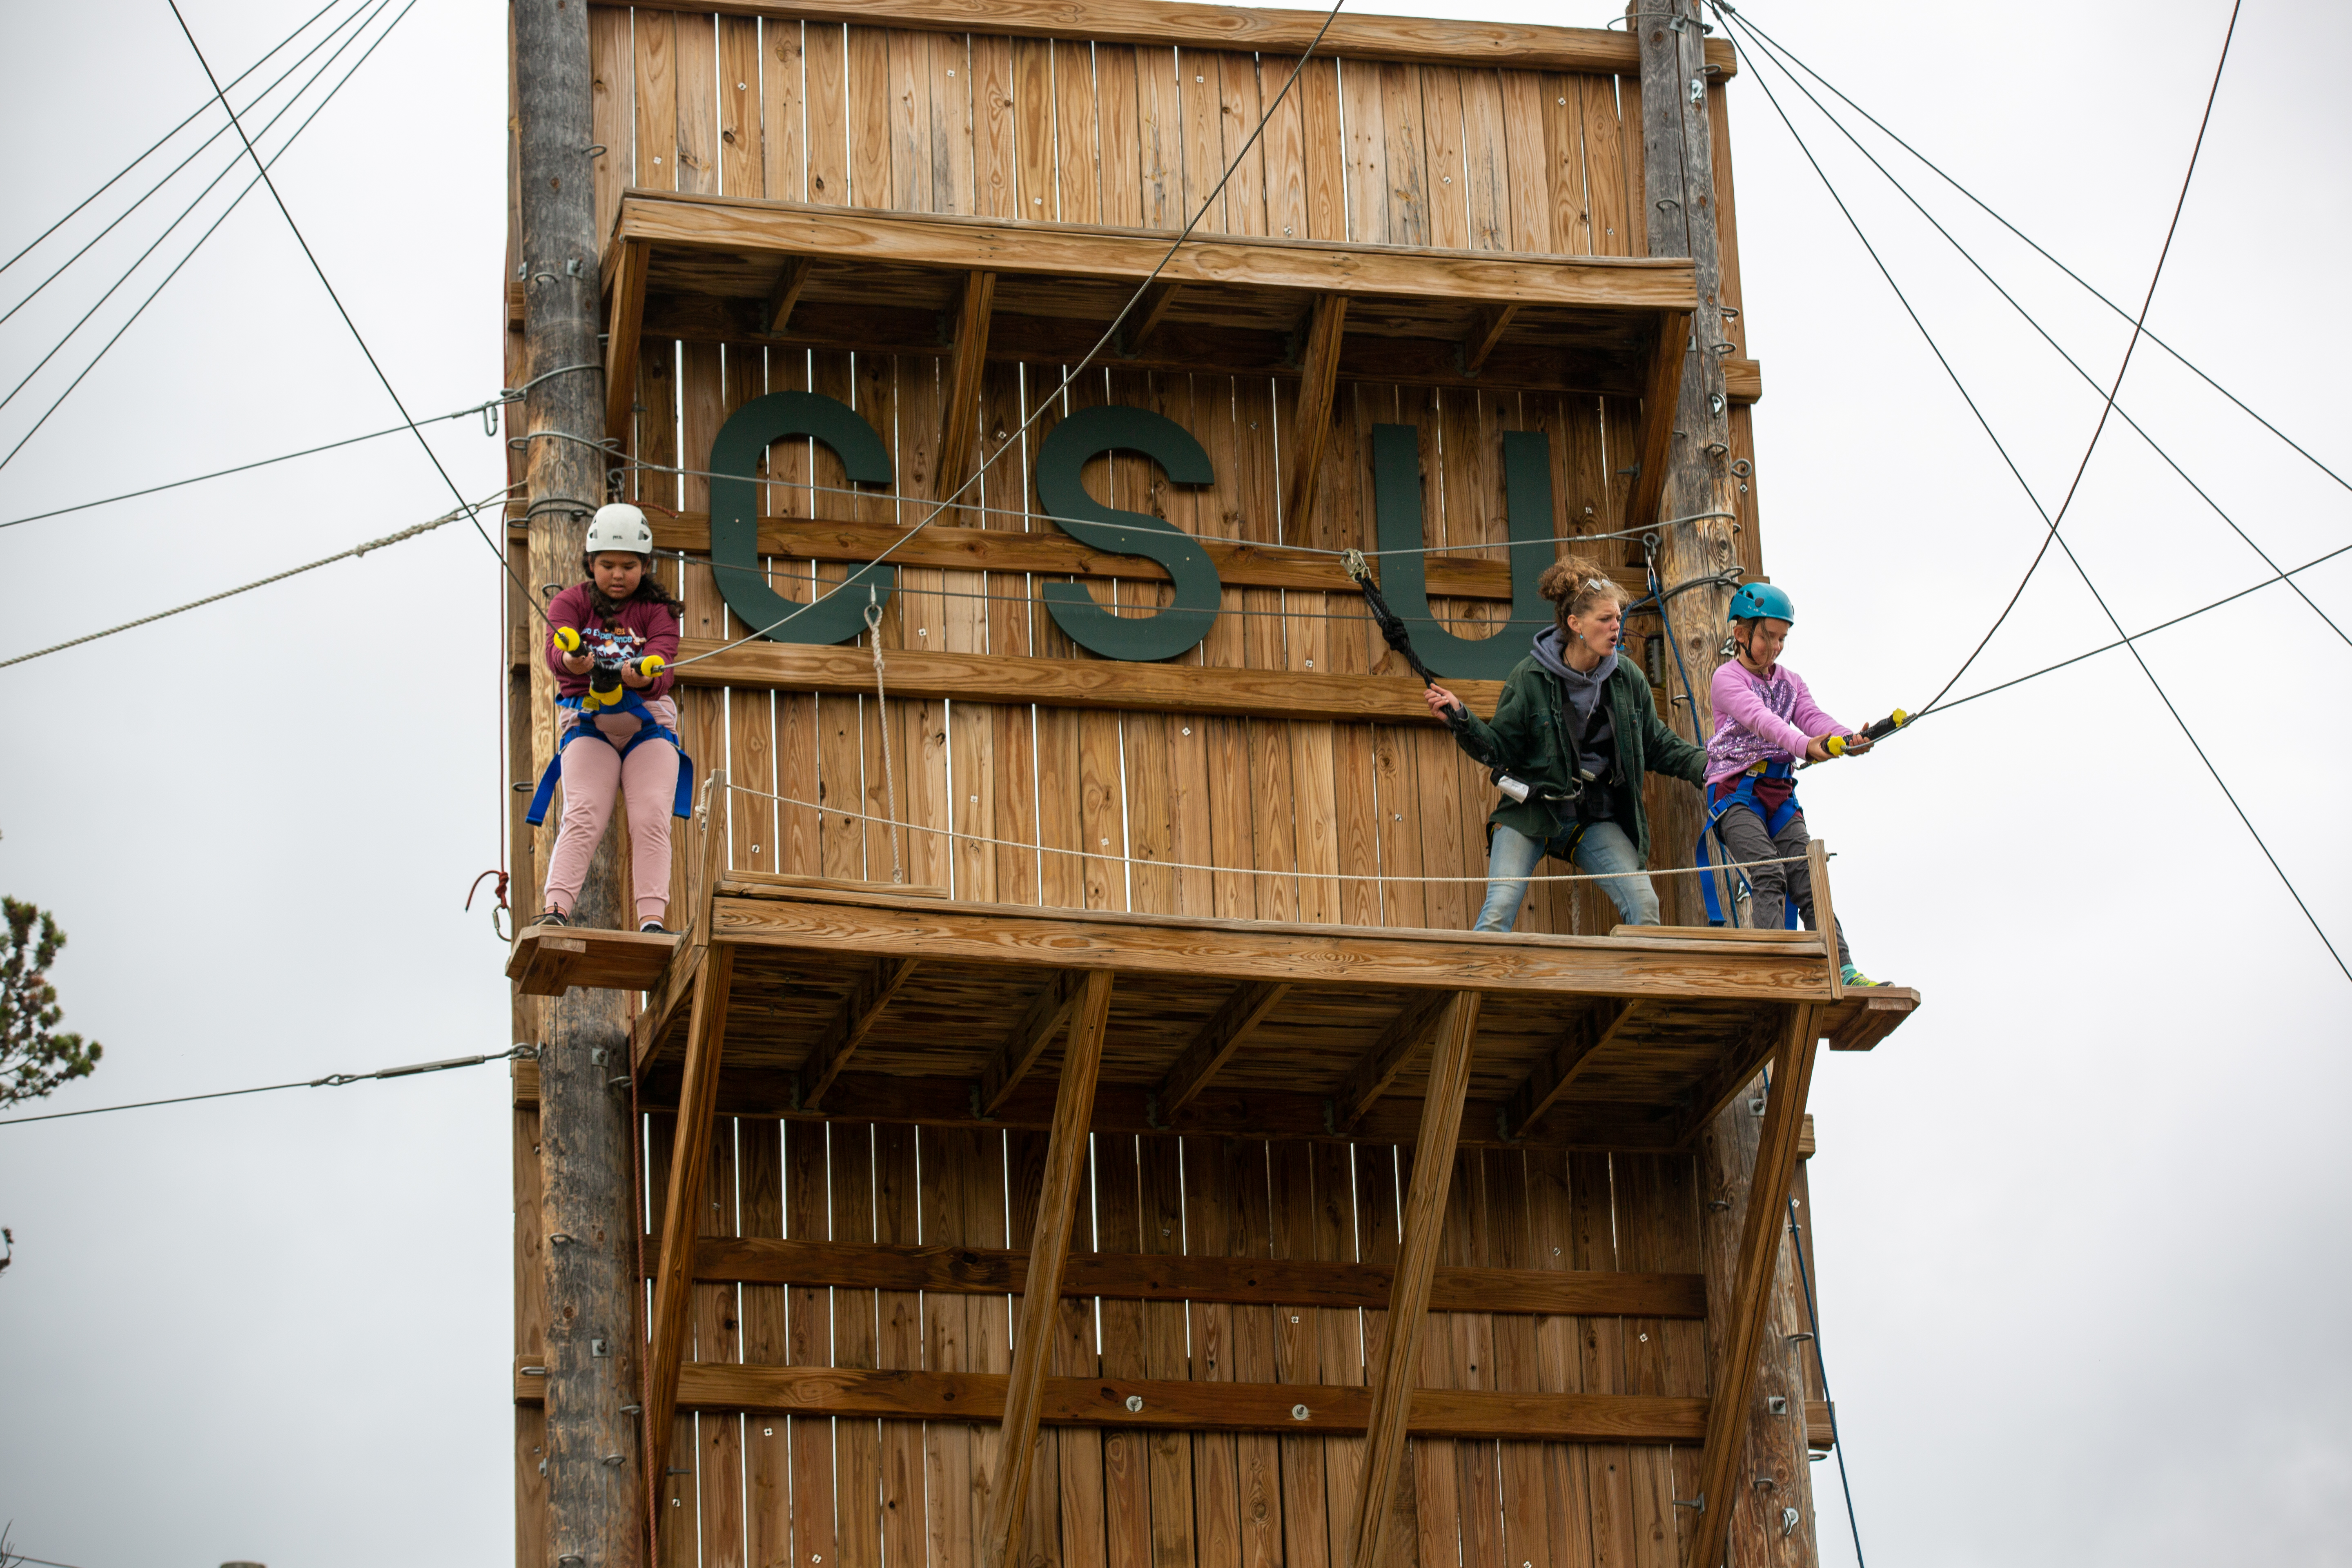 Two O'Dea students strapped into harnesses prepare to descend while on a ropes course.